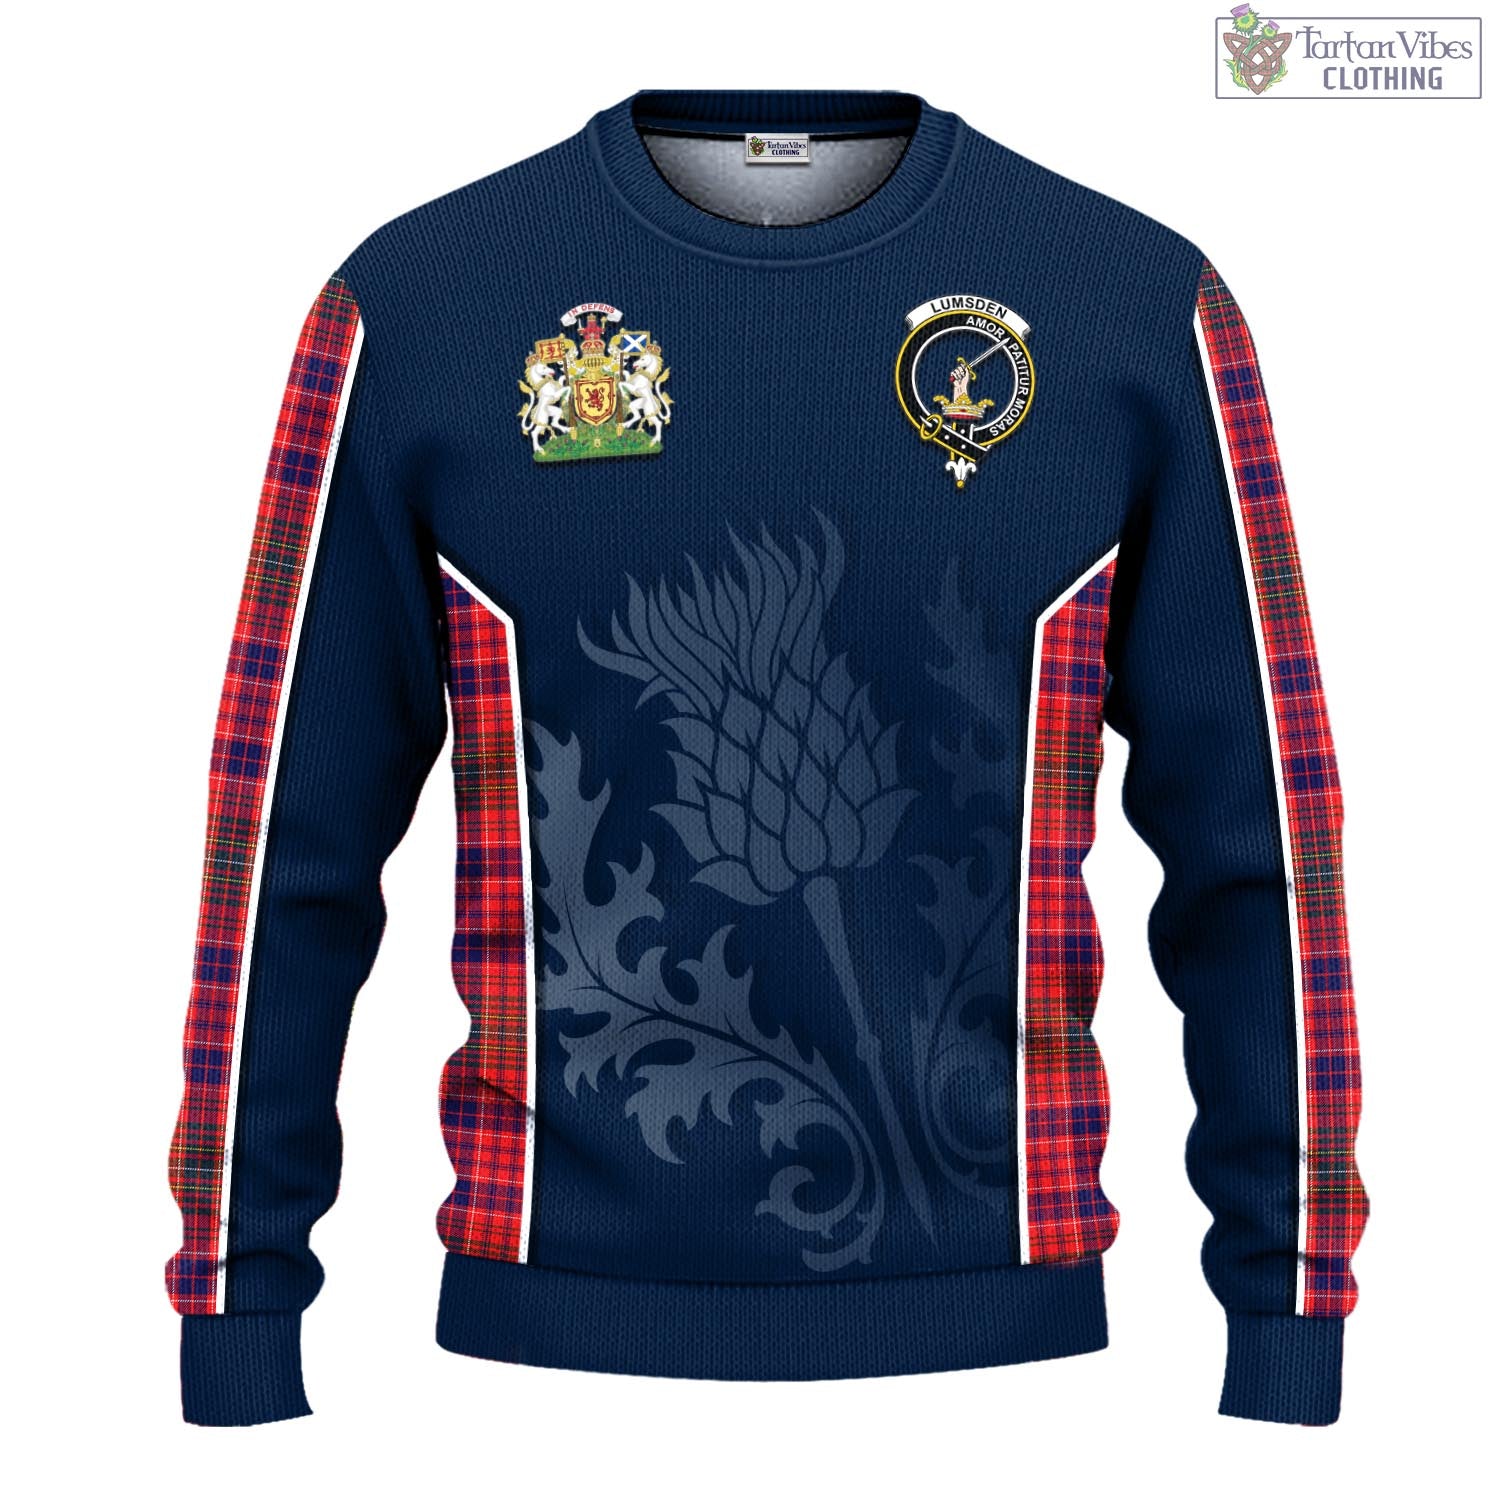 Tartan Vibes Clothing Lumsden Modern Tartan Knitted Sweatshirt with Family Crest and Scottish Thistle Vibes Sport Style